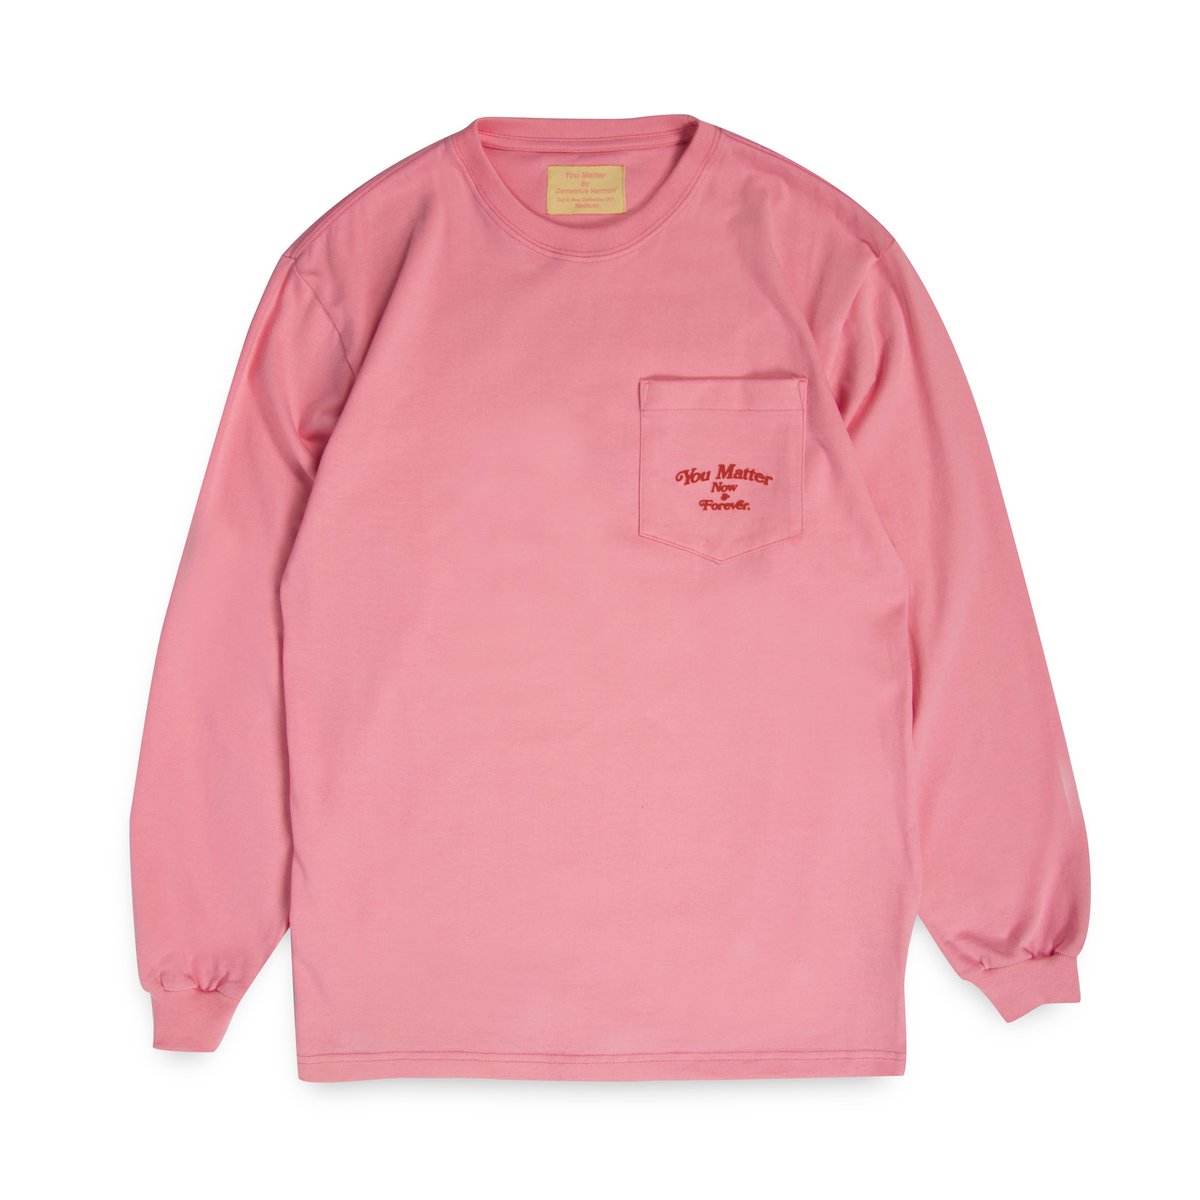 You Matter, Now & Forever Cut & Sew Long Sleeves Available Now while supplies last
demetriusharmon.com

Made using 250GSM superheavy combed/ring-spun cotton, piece dyed, and sewn with care. The logos are featured in high density puff print that jumps off the garment.